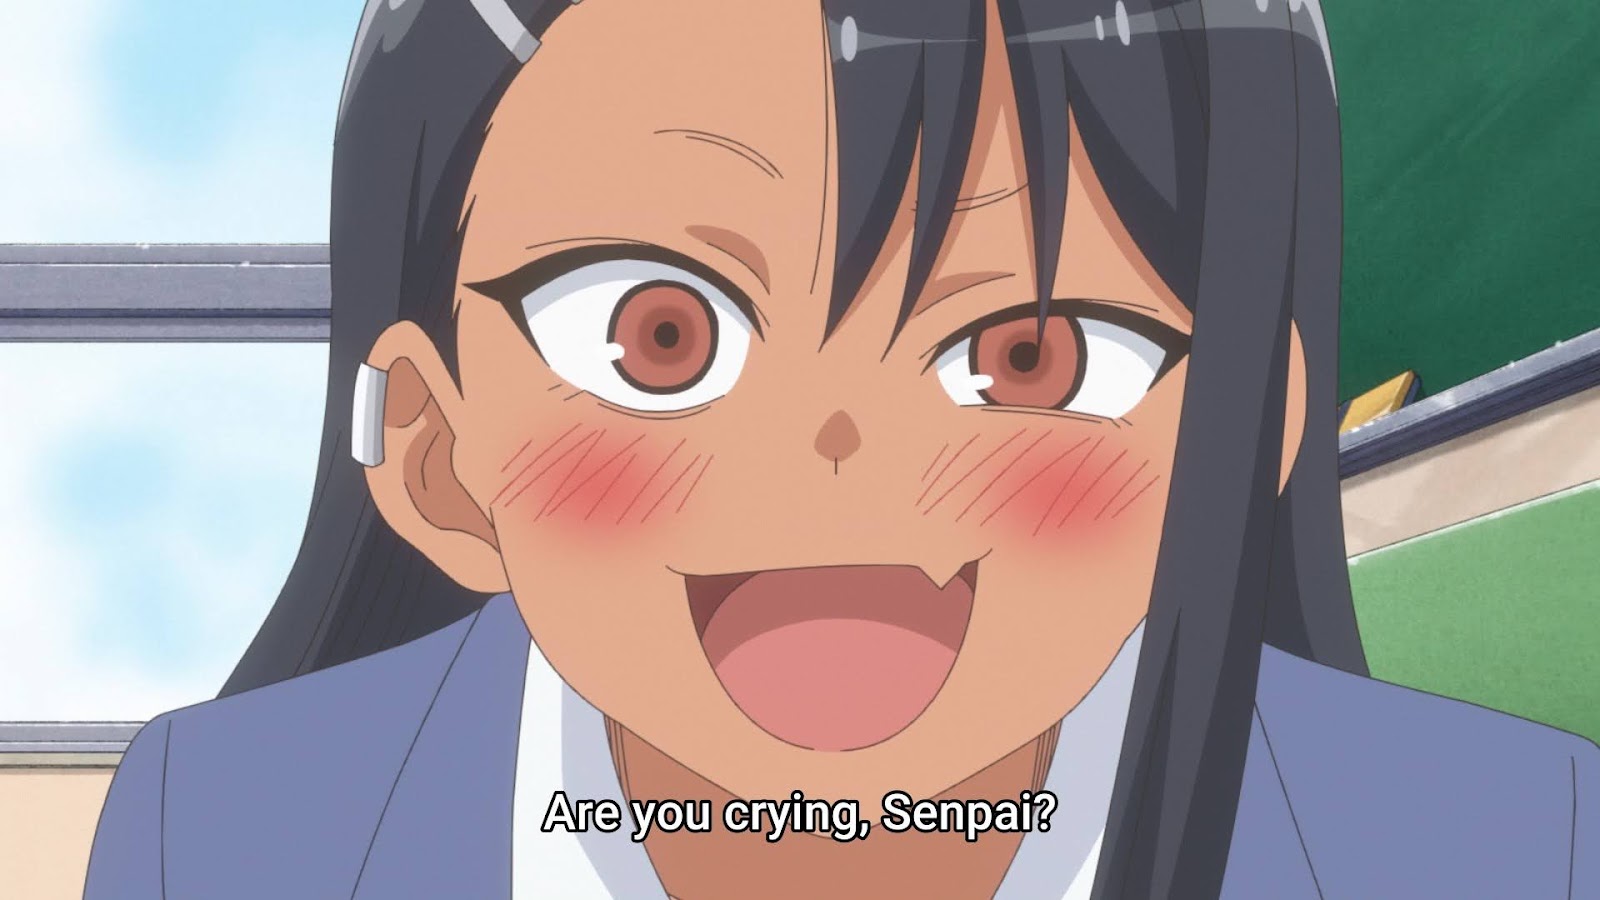 Don't Toy With Me, Miss Nagatoro 2nd Attack Episode 13 & 14